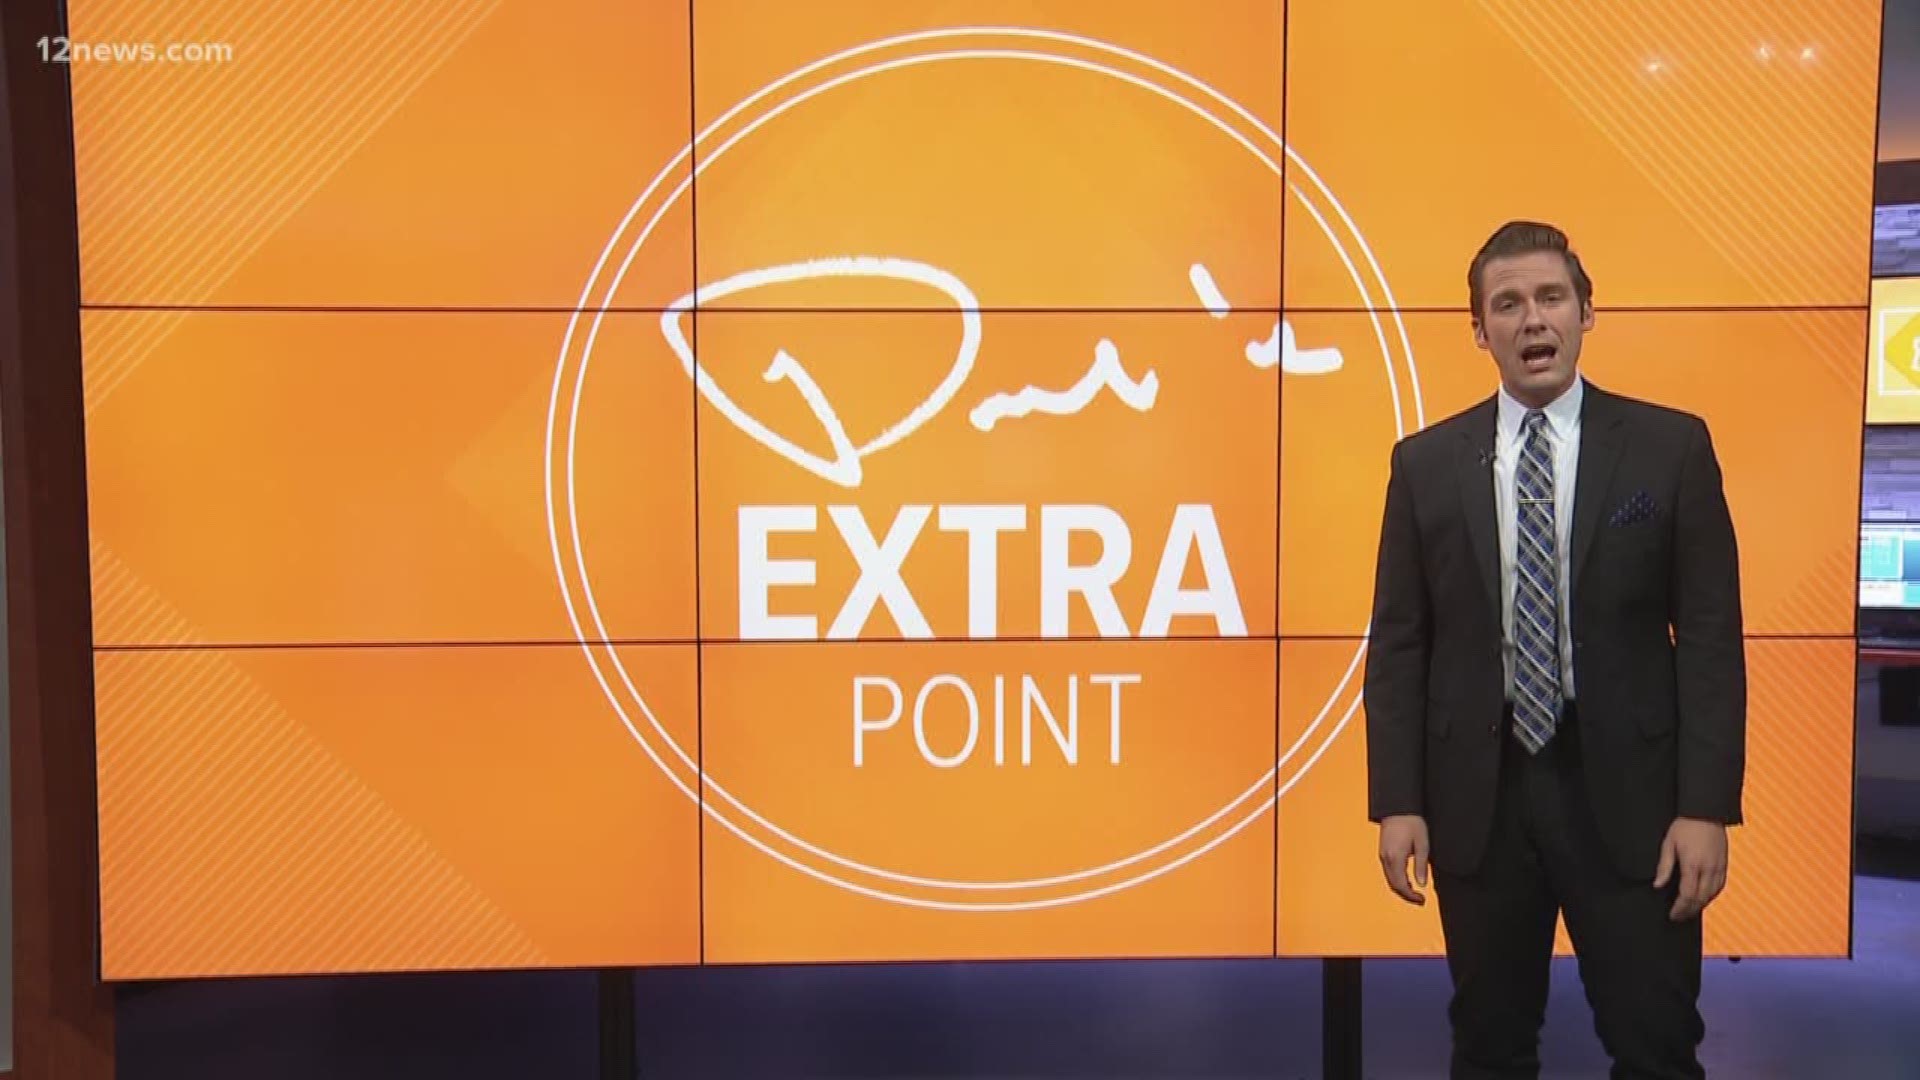 In Paul's Extra Point, Paul Gerke takes a look at the skyrocketing cost of a college education.